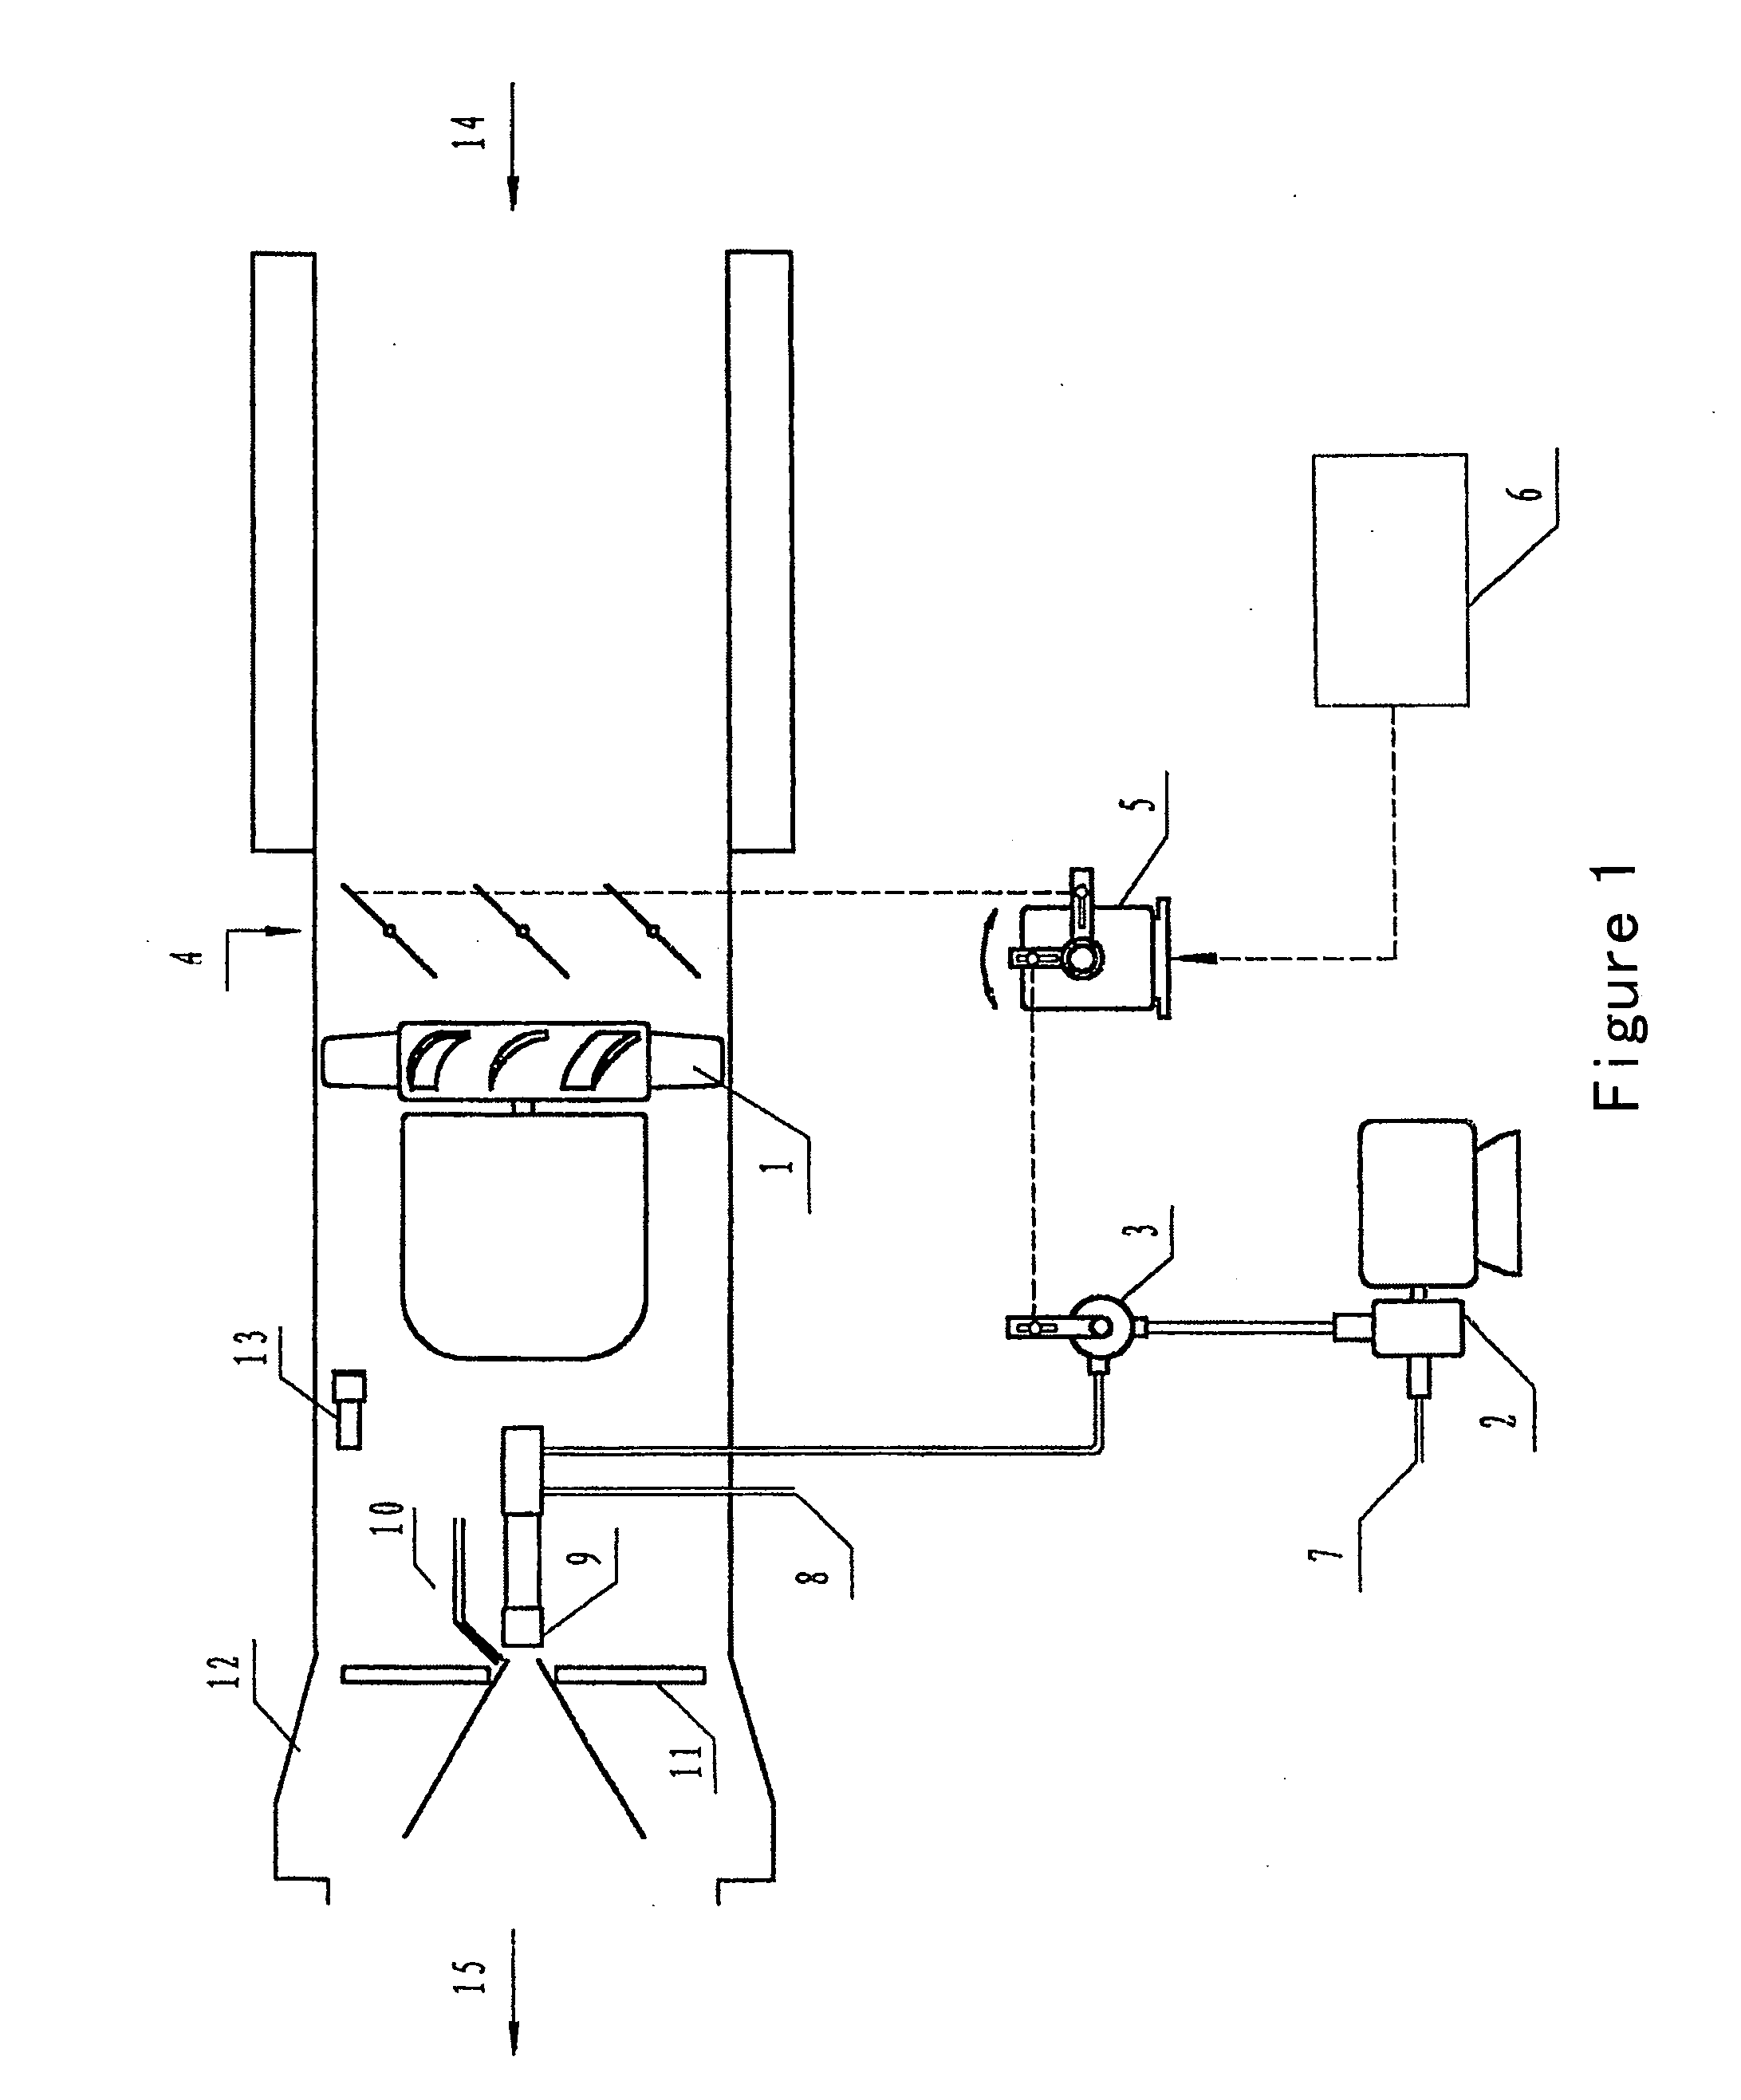 Autocontrol burner and a combustion control method